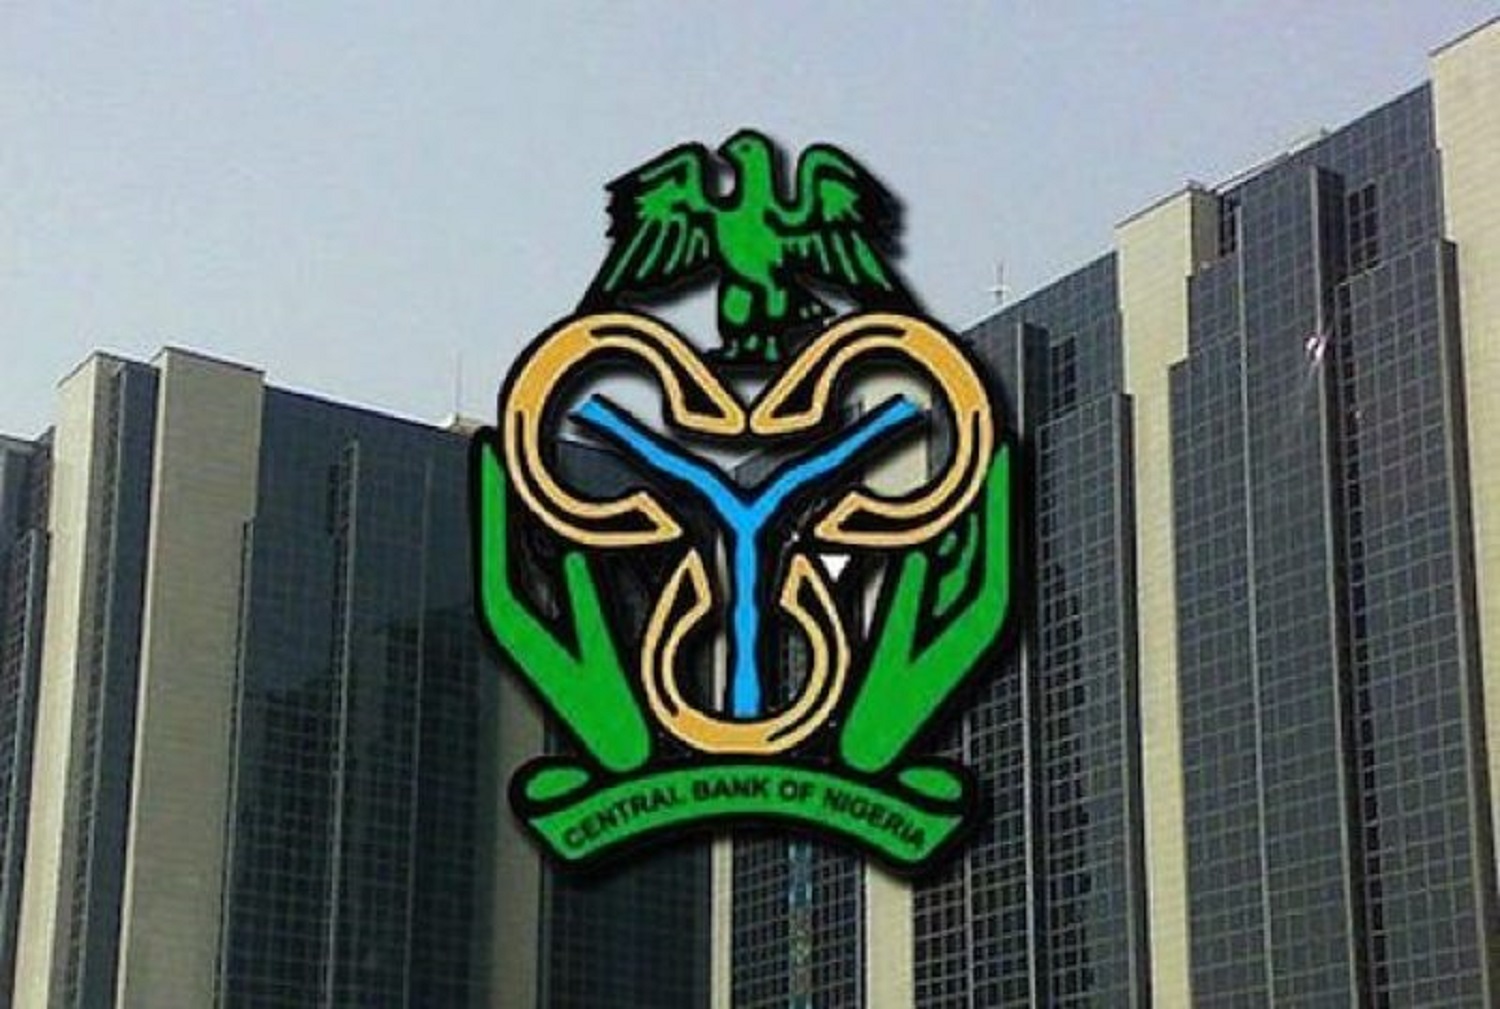 CBN: Confronting challenges of the economy